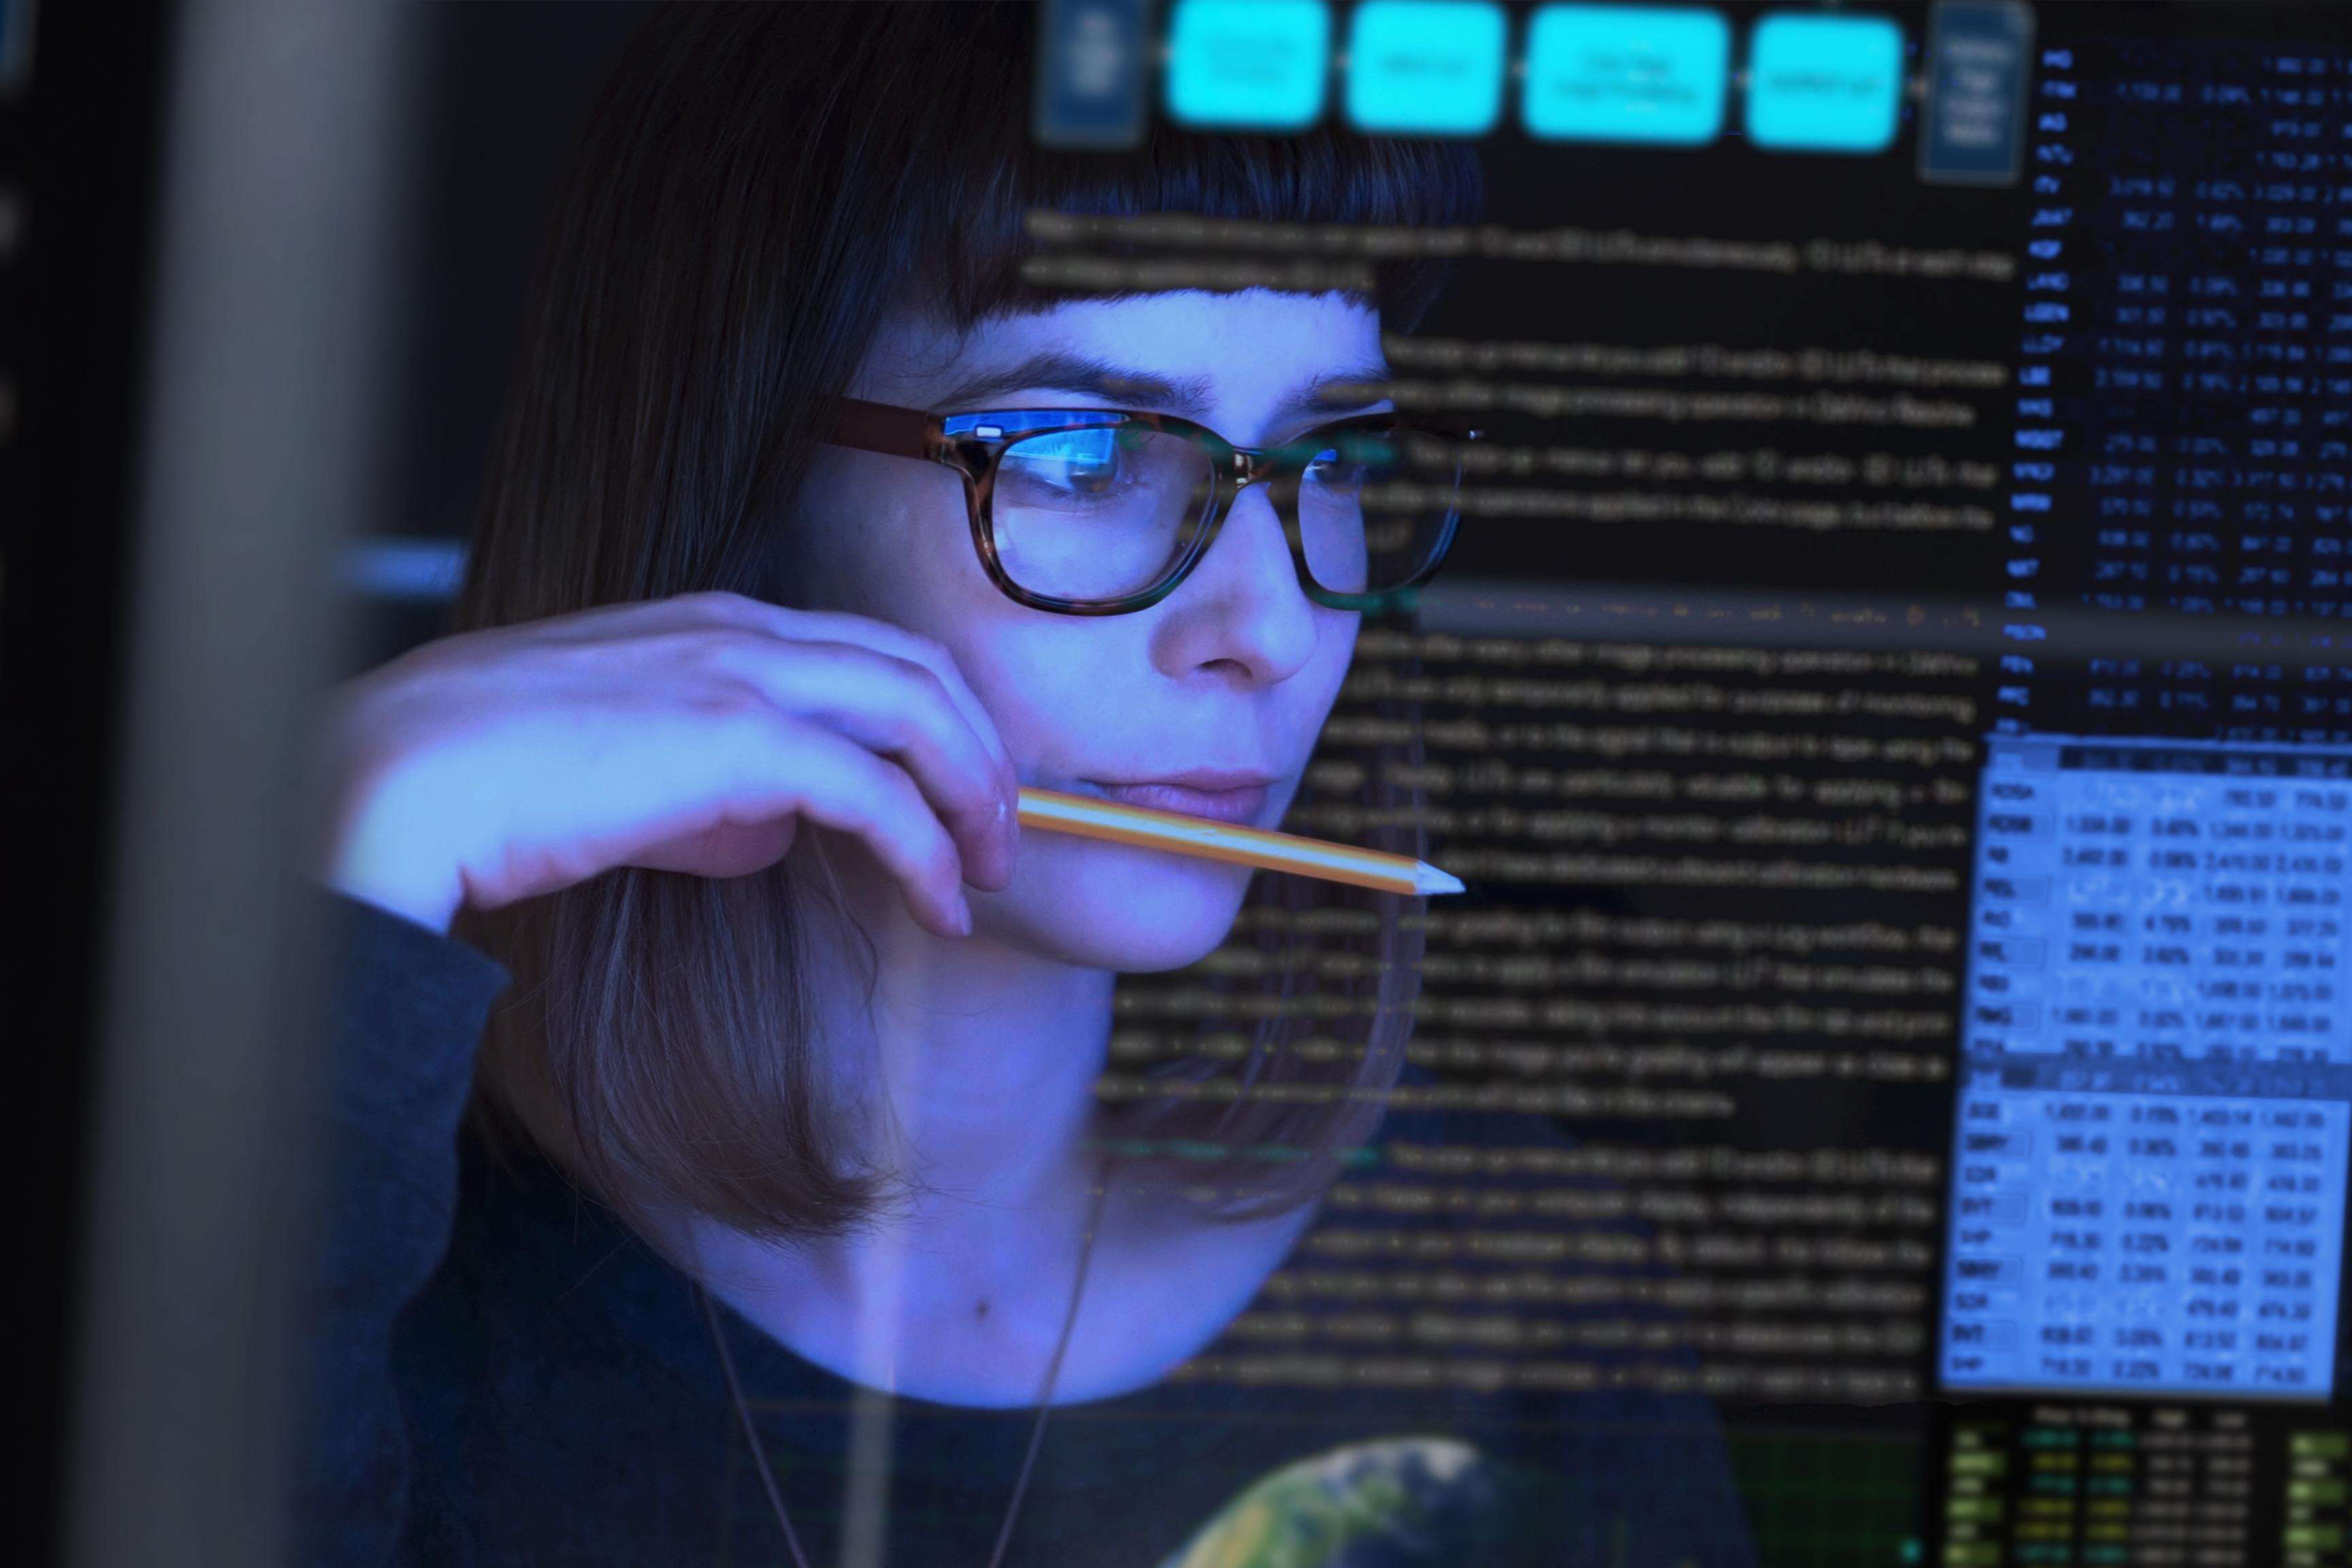 Woman wearing glasses and holding a pencil in her hand and putting it to her lips while looking at a screen with data sets.